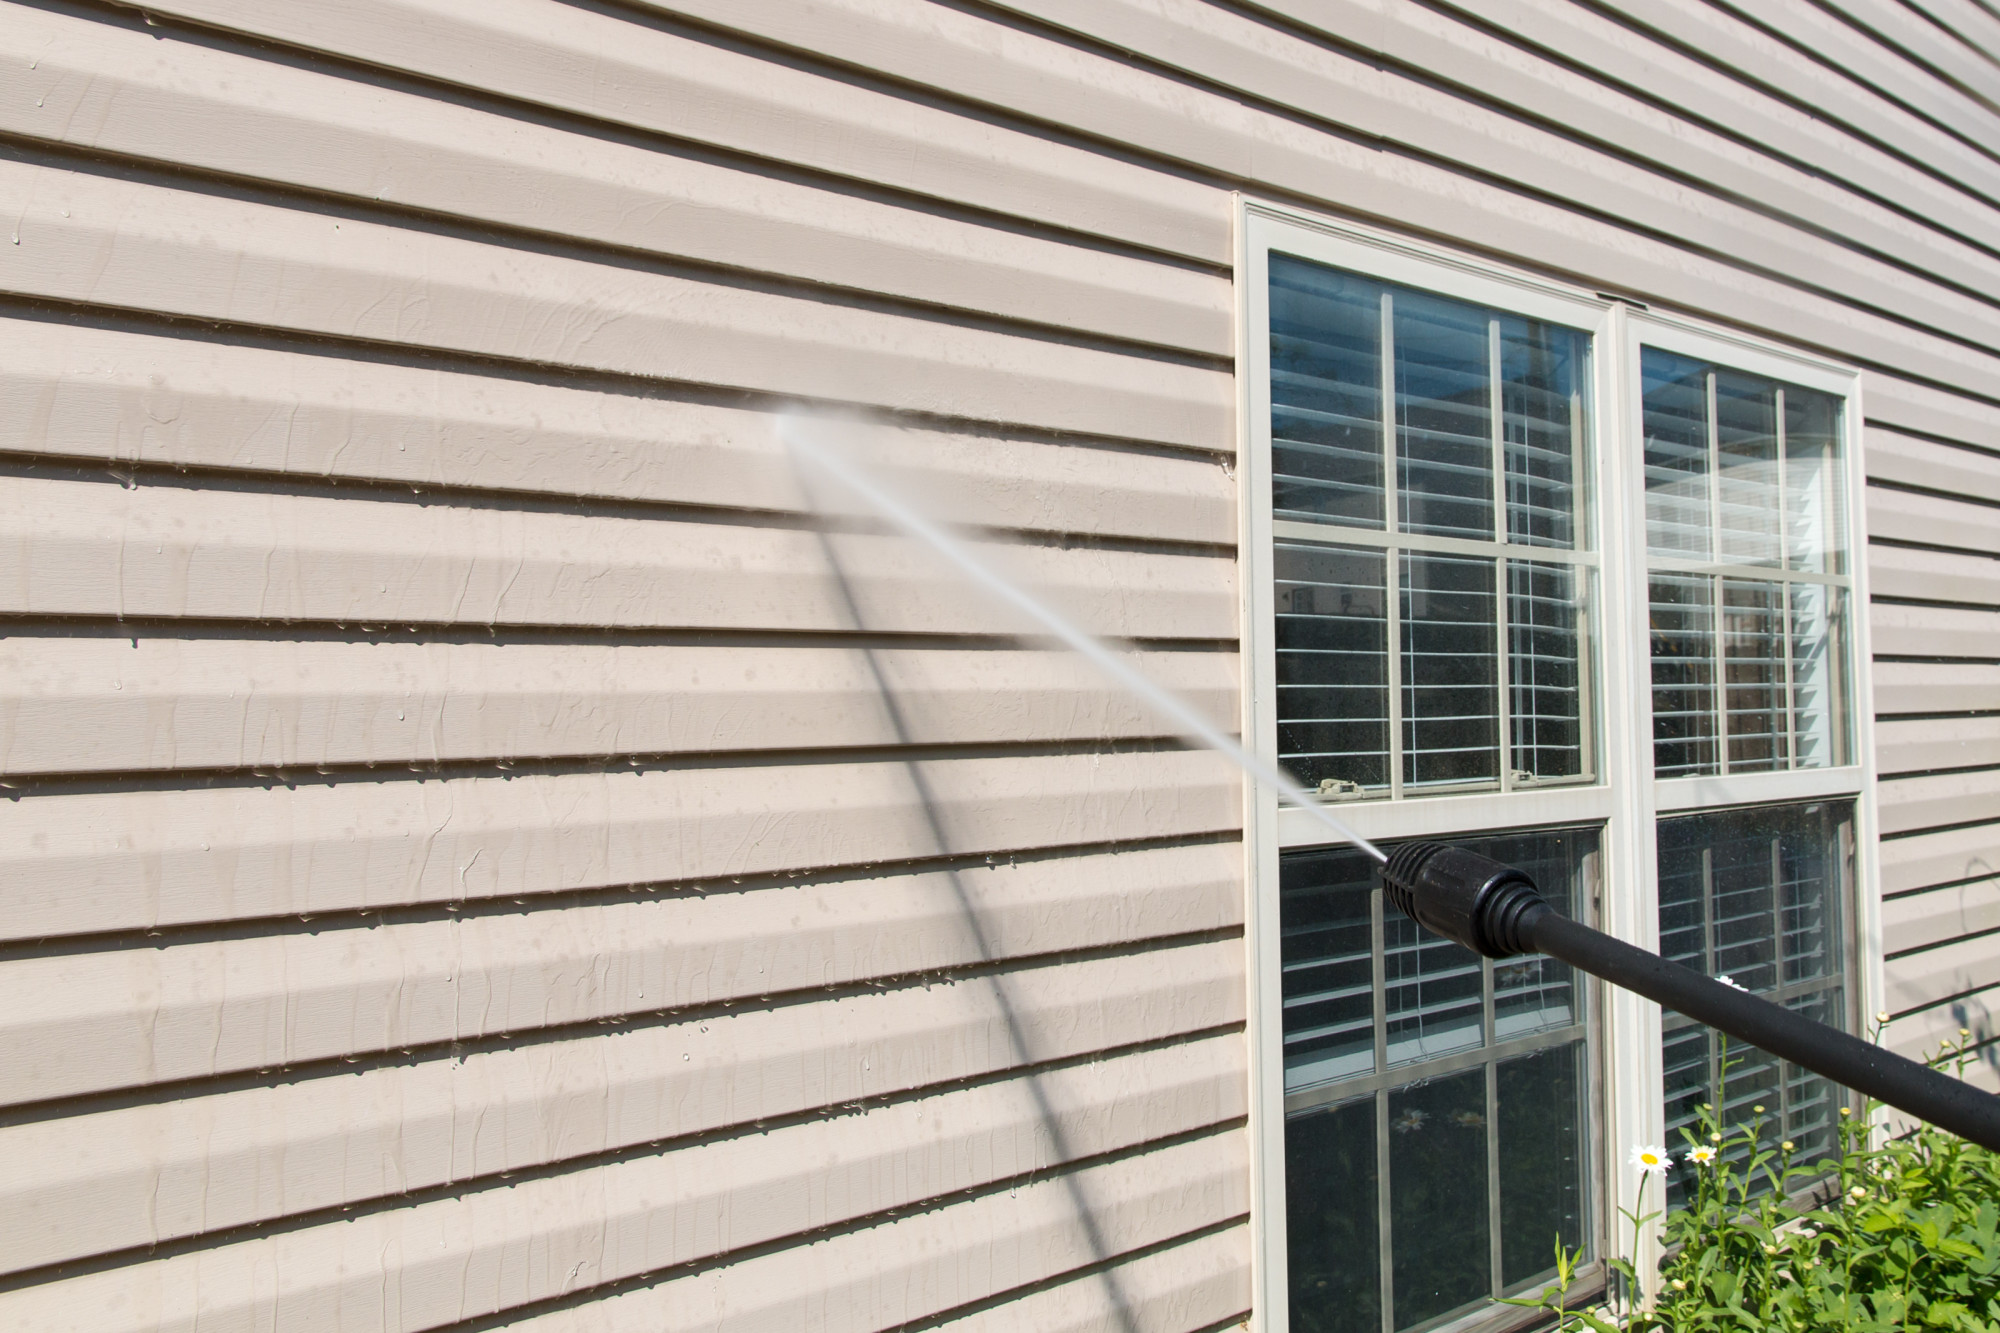 When you're planning a major summer home improvement project like enhancing the exterior of your home, find out how to clean vinyl siding.